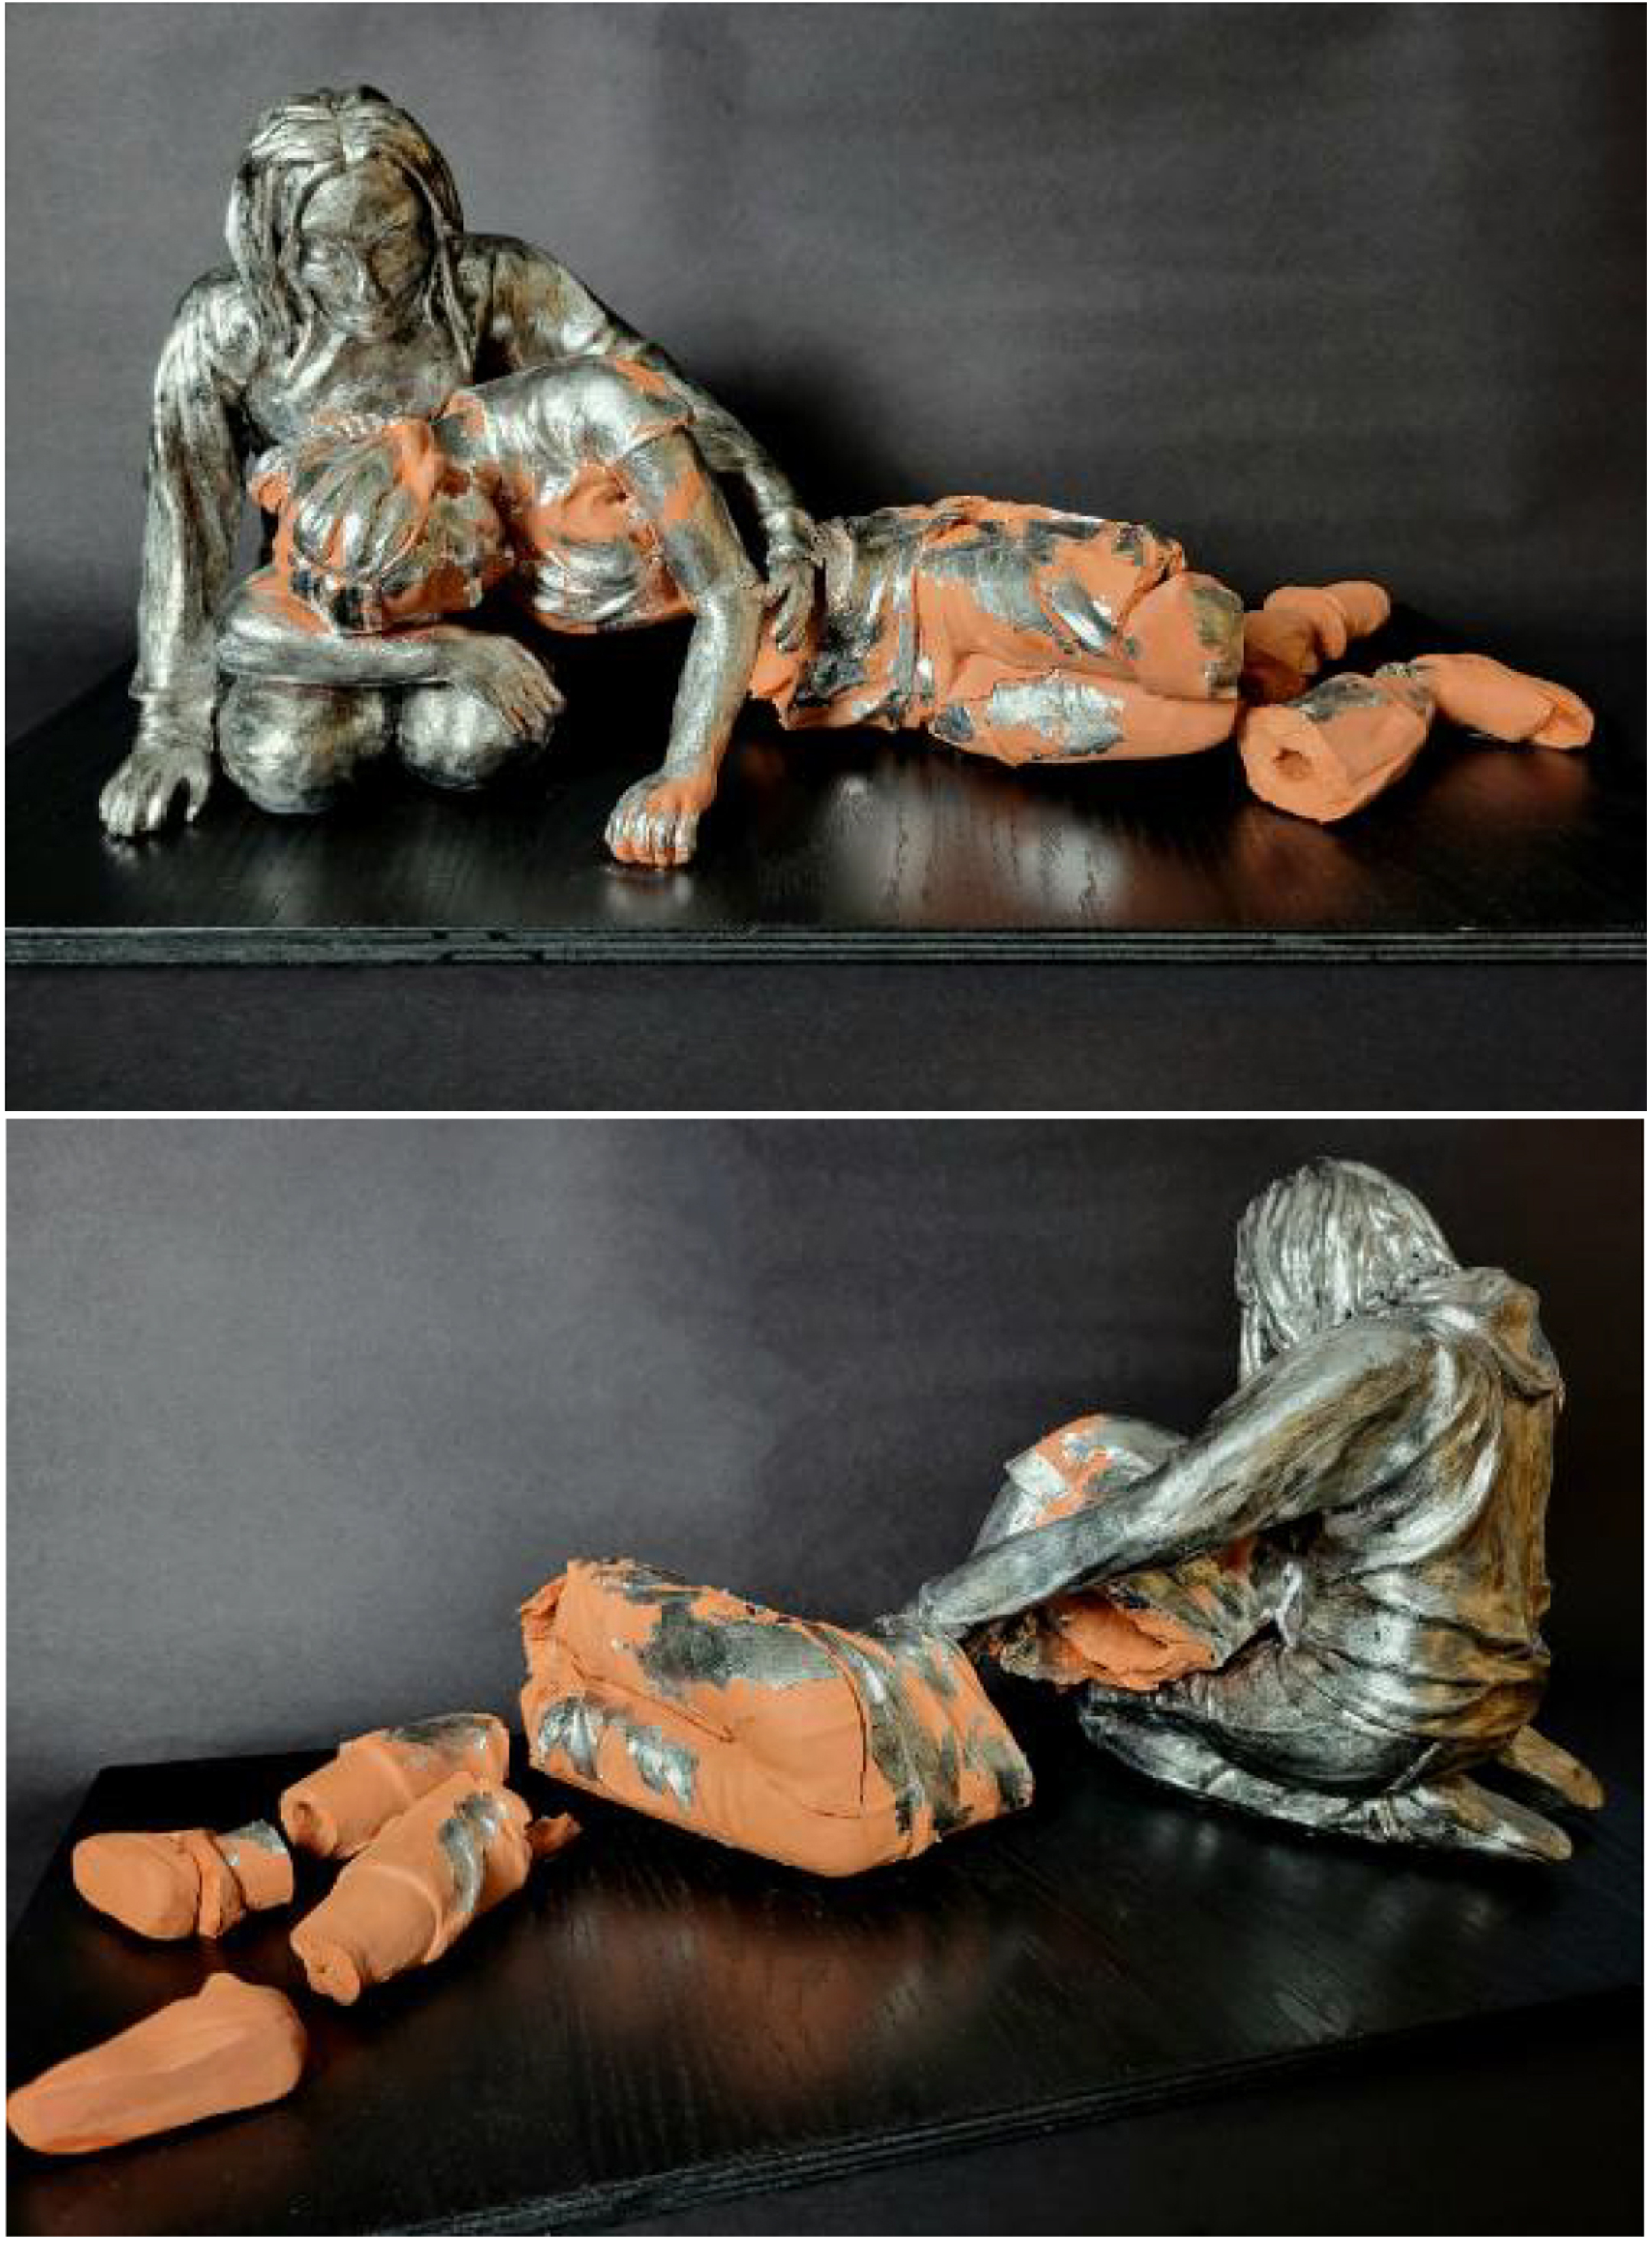 Two stacked images showing the front and rear view of a statue, in silver paint and clay brown of a person comforting a woman laying down, with her body shattered into segments